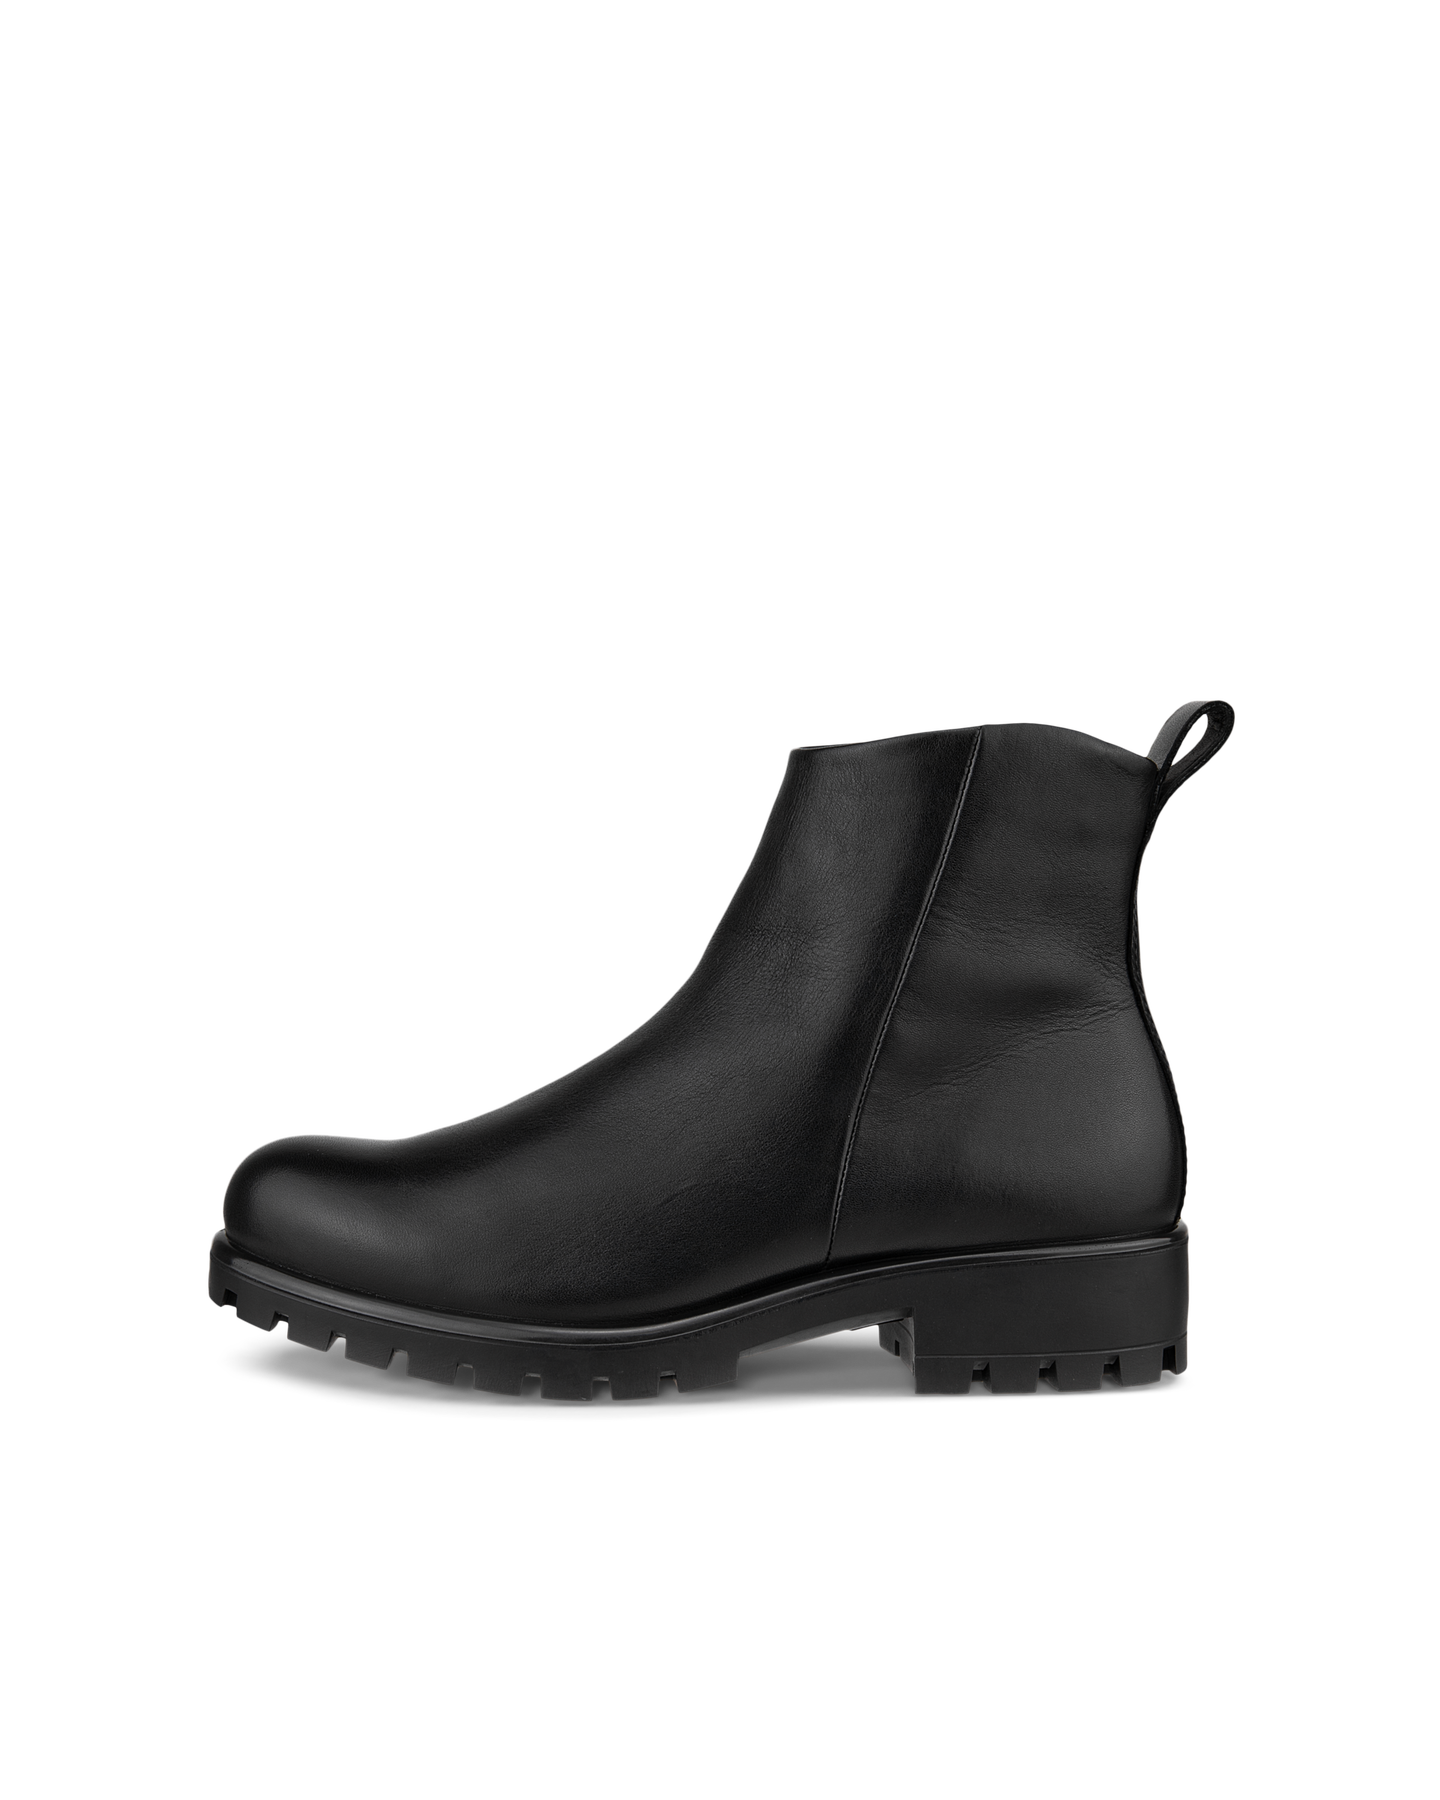 UPC 194890321823 product image for ECCO Women's Modtray Ankle Boot Size 7 Leather Black | upcitemdb.com